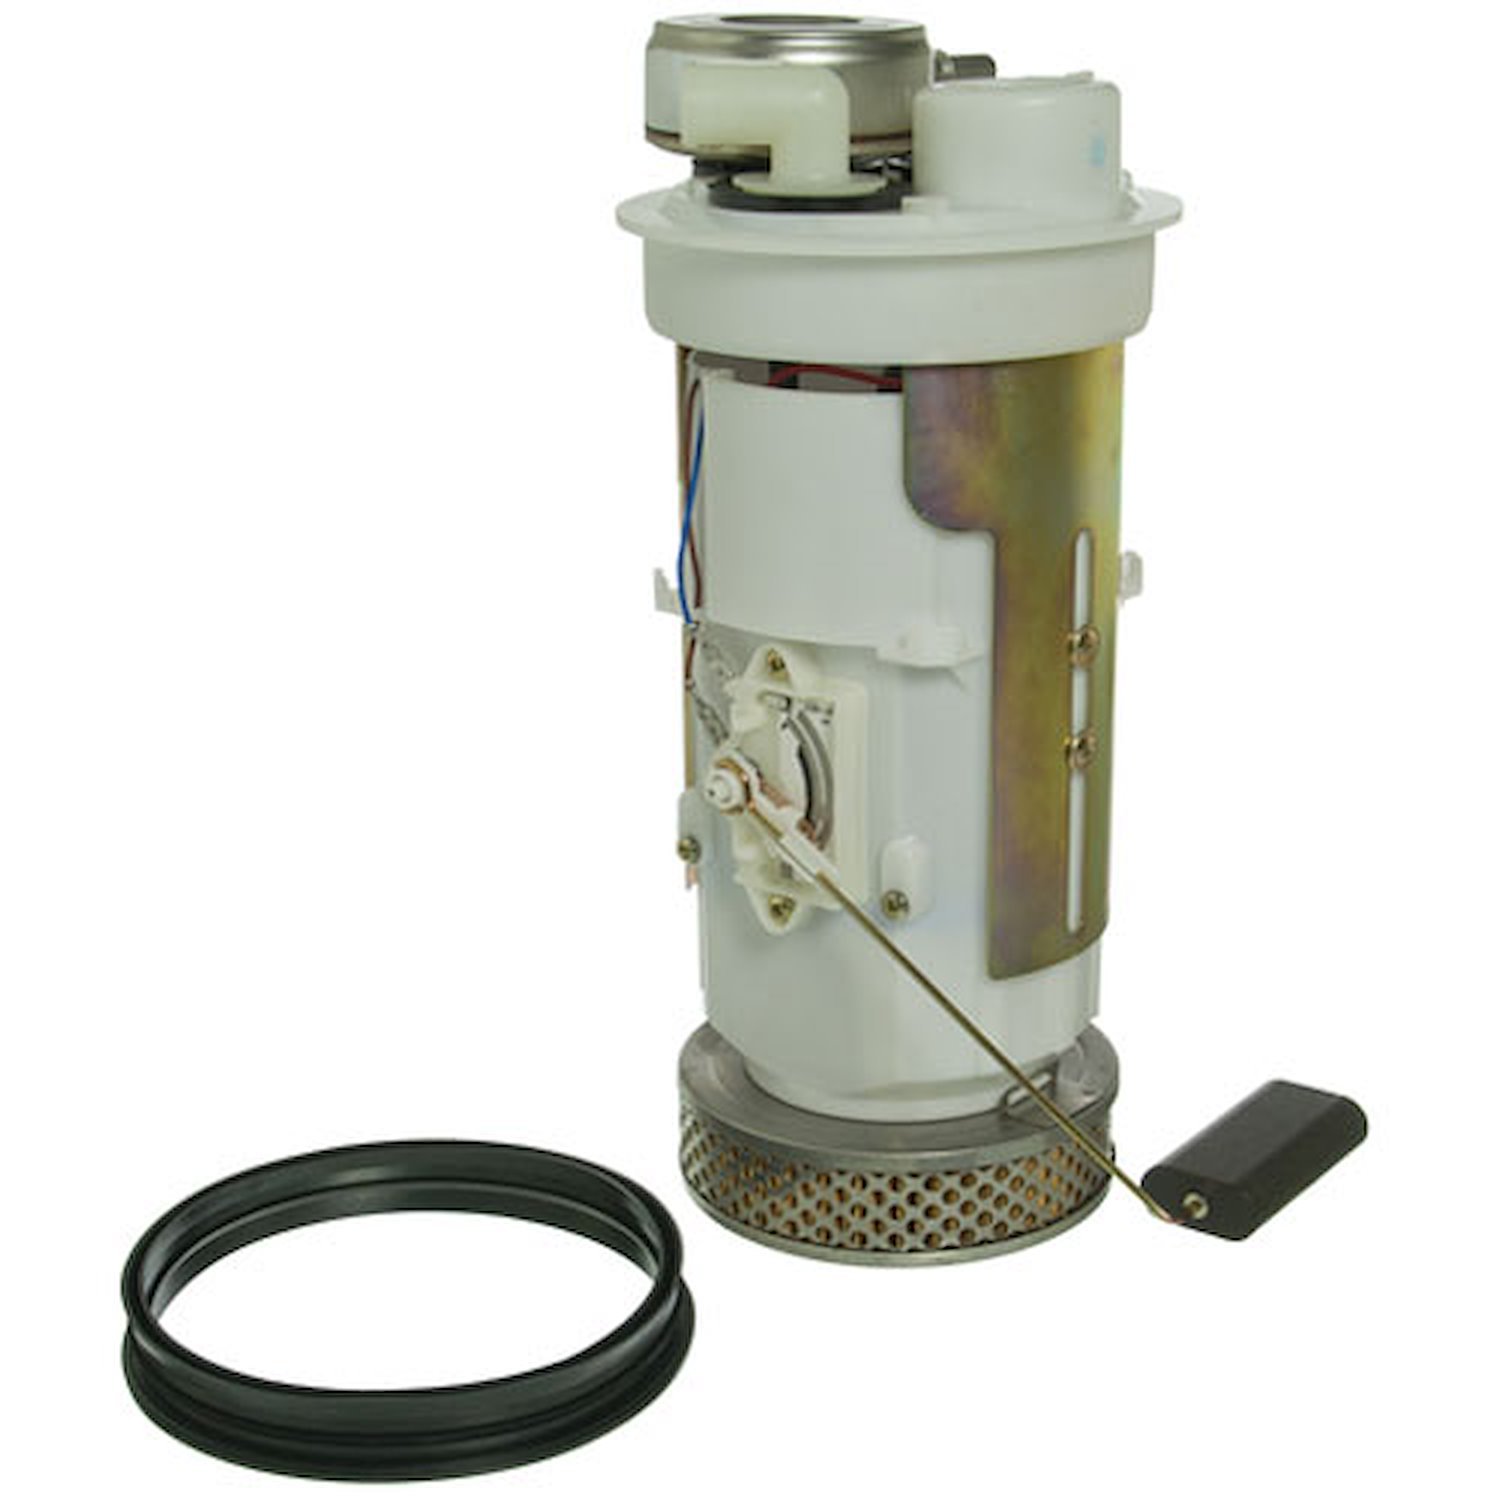 OE Chrysler/Dodge Replacement Electric Fuel Pump Module Assembly 1993-95 Dodge B150/B1500/B250/B2500/B350/B3500 3.9L V6/5.2L V8